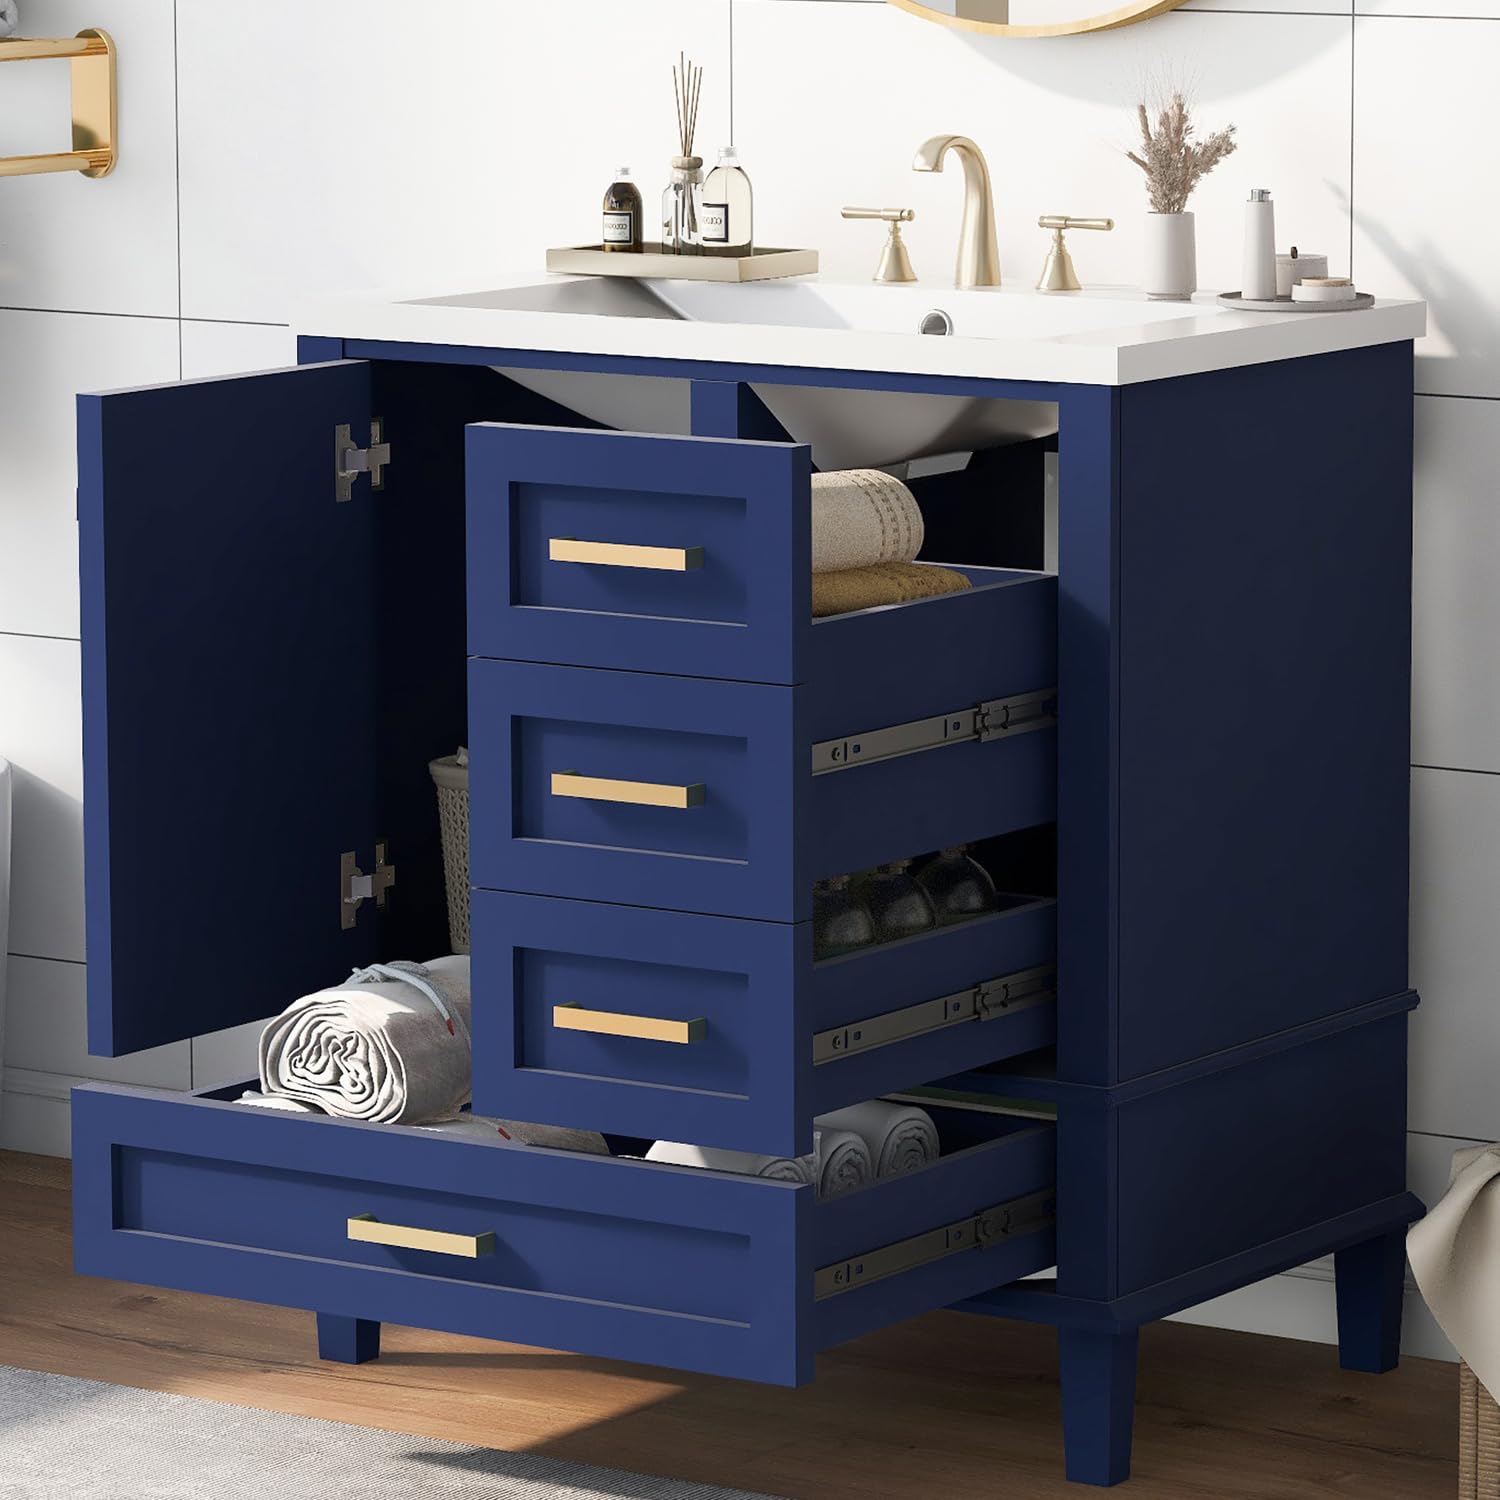 Lostcat 30inch Bathroom Vanity with Sink Combo Set,with 2 Drawers and a Tip-Out Drawer, Soft Closing Cabinet Door with Organizer,Solid Wood Frame,Easy Assembly(Blue)